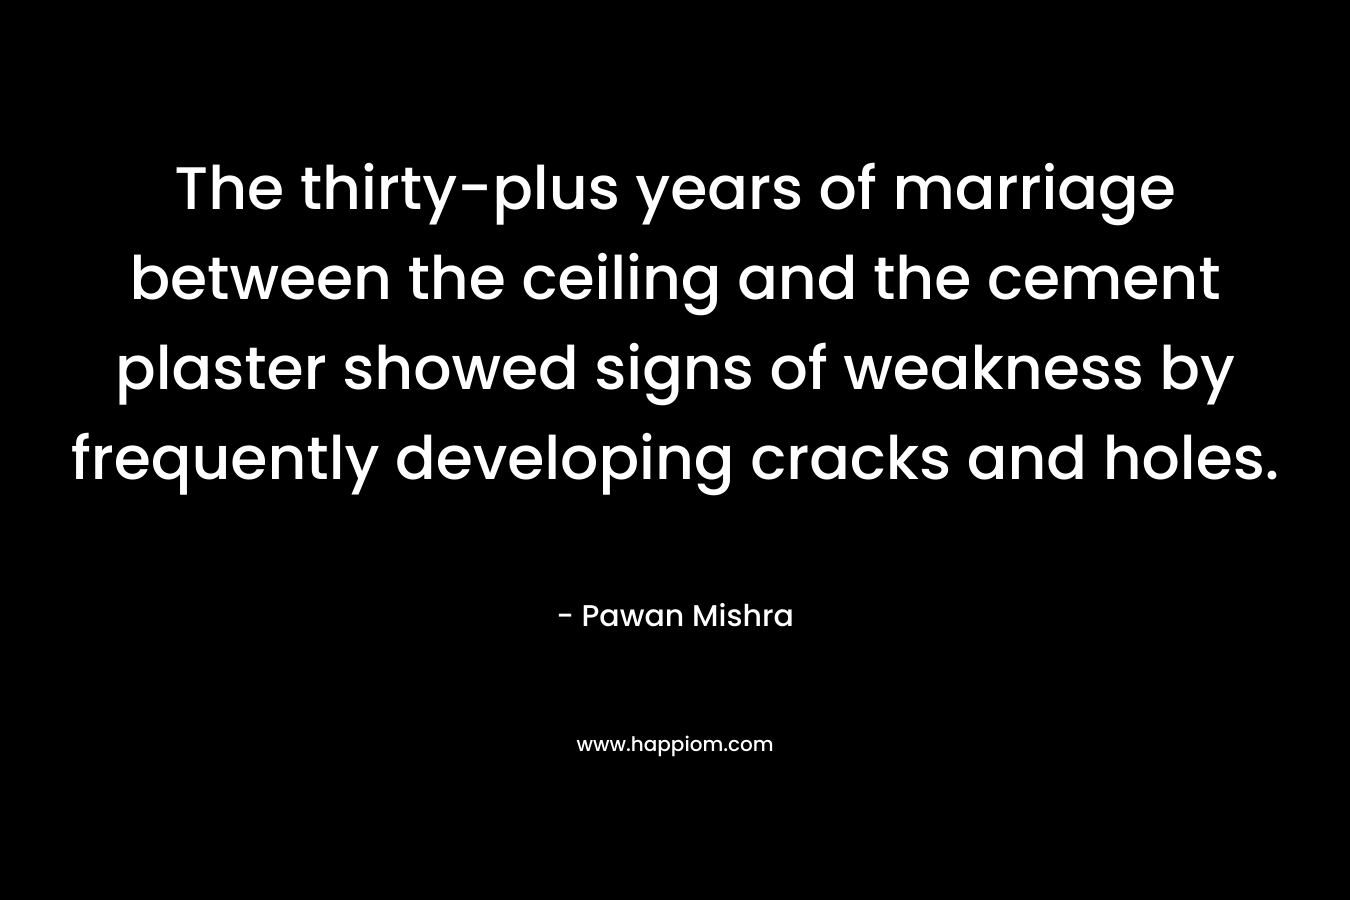 The thirty-plus years of marriage between the ceiling and the cement plaster showed signs of weakness by frequently developing cracks and holes. – Pawan Mishra